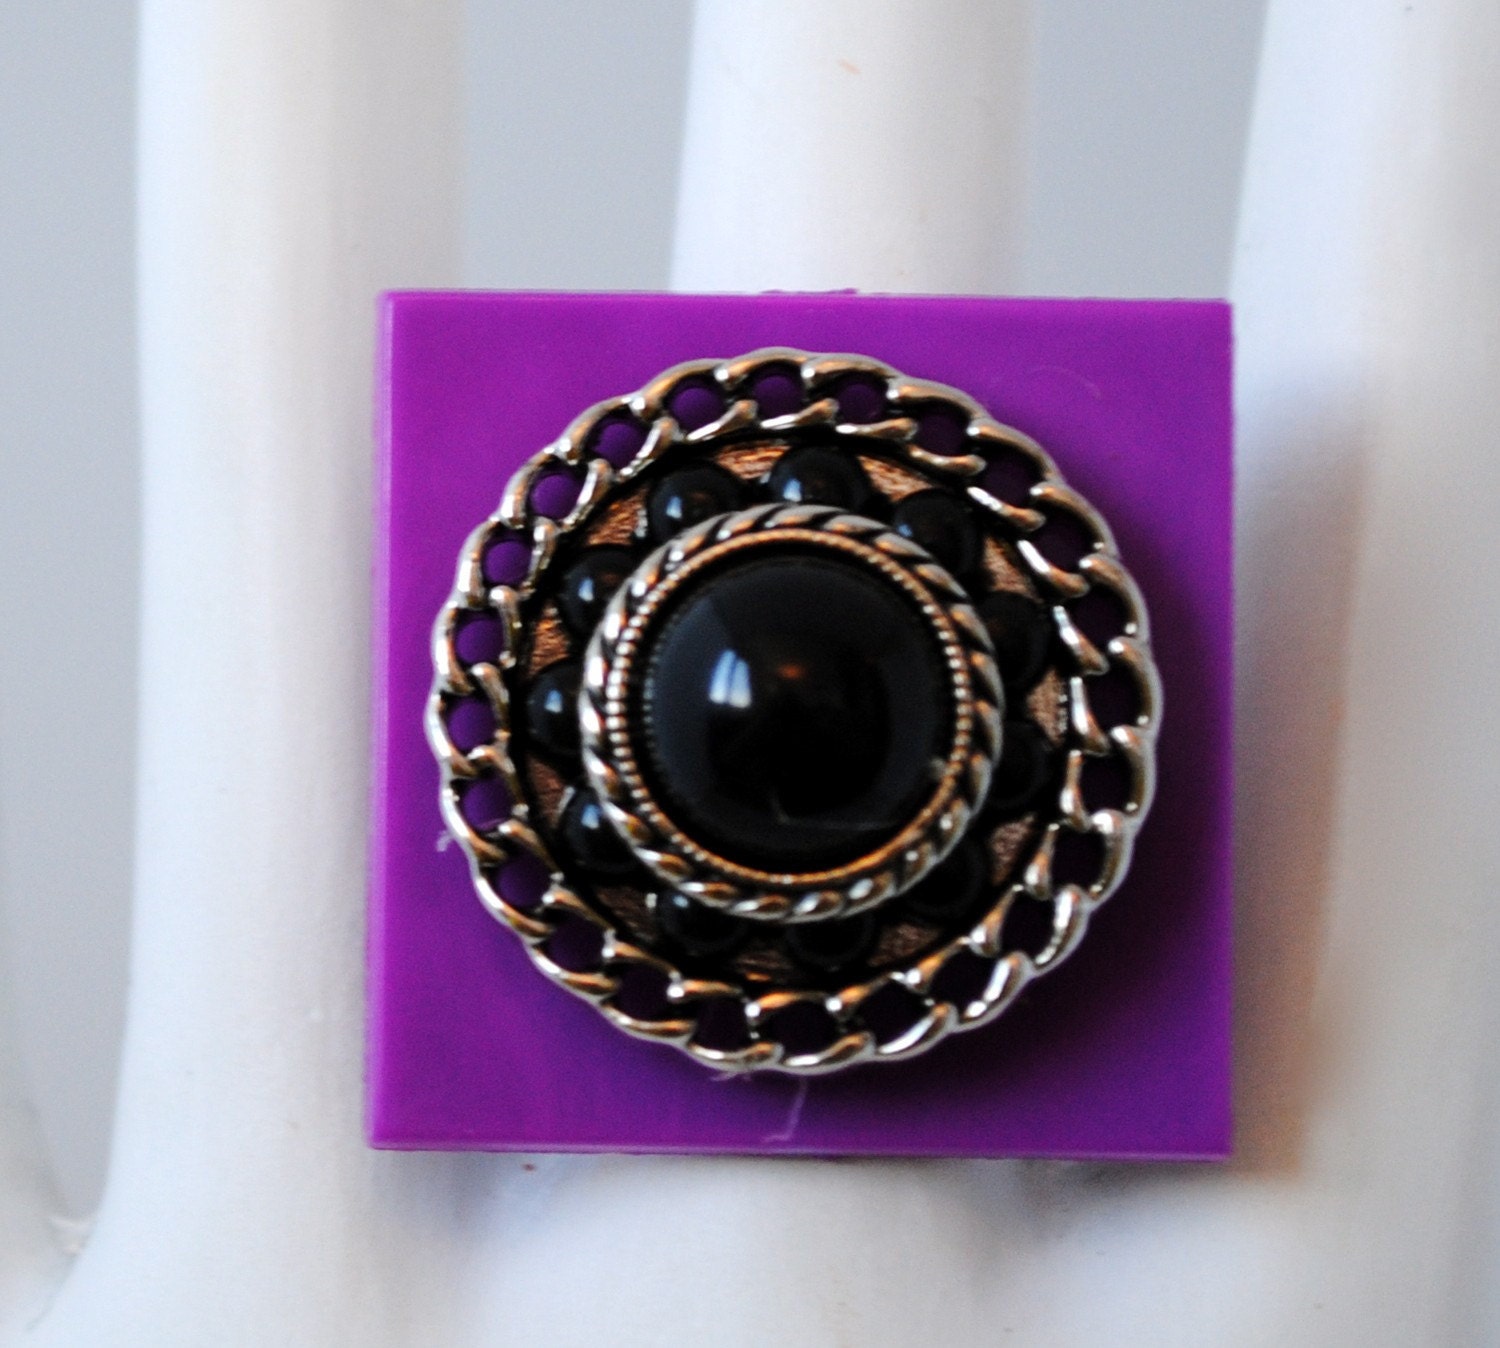 Purple button ring black silver and purple OOAK statement jewelry gift adjustable under 15 USD - victoriascharms